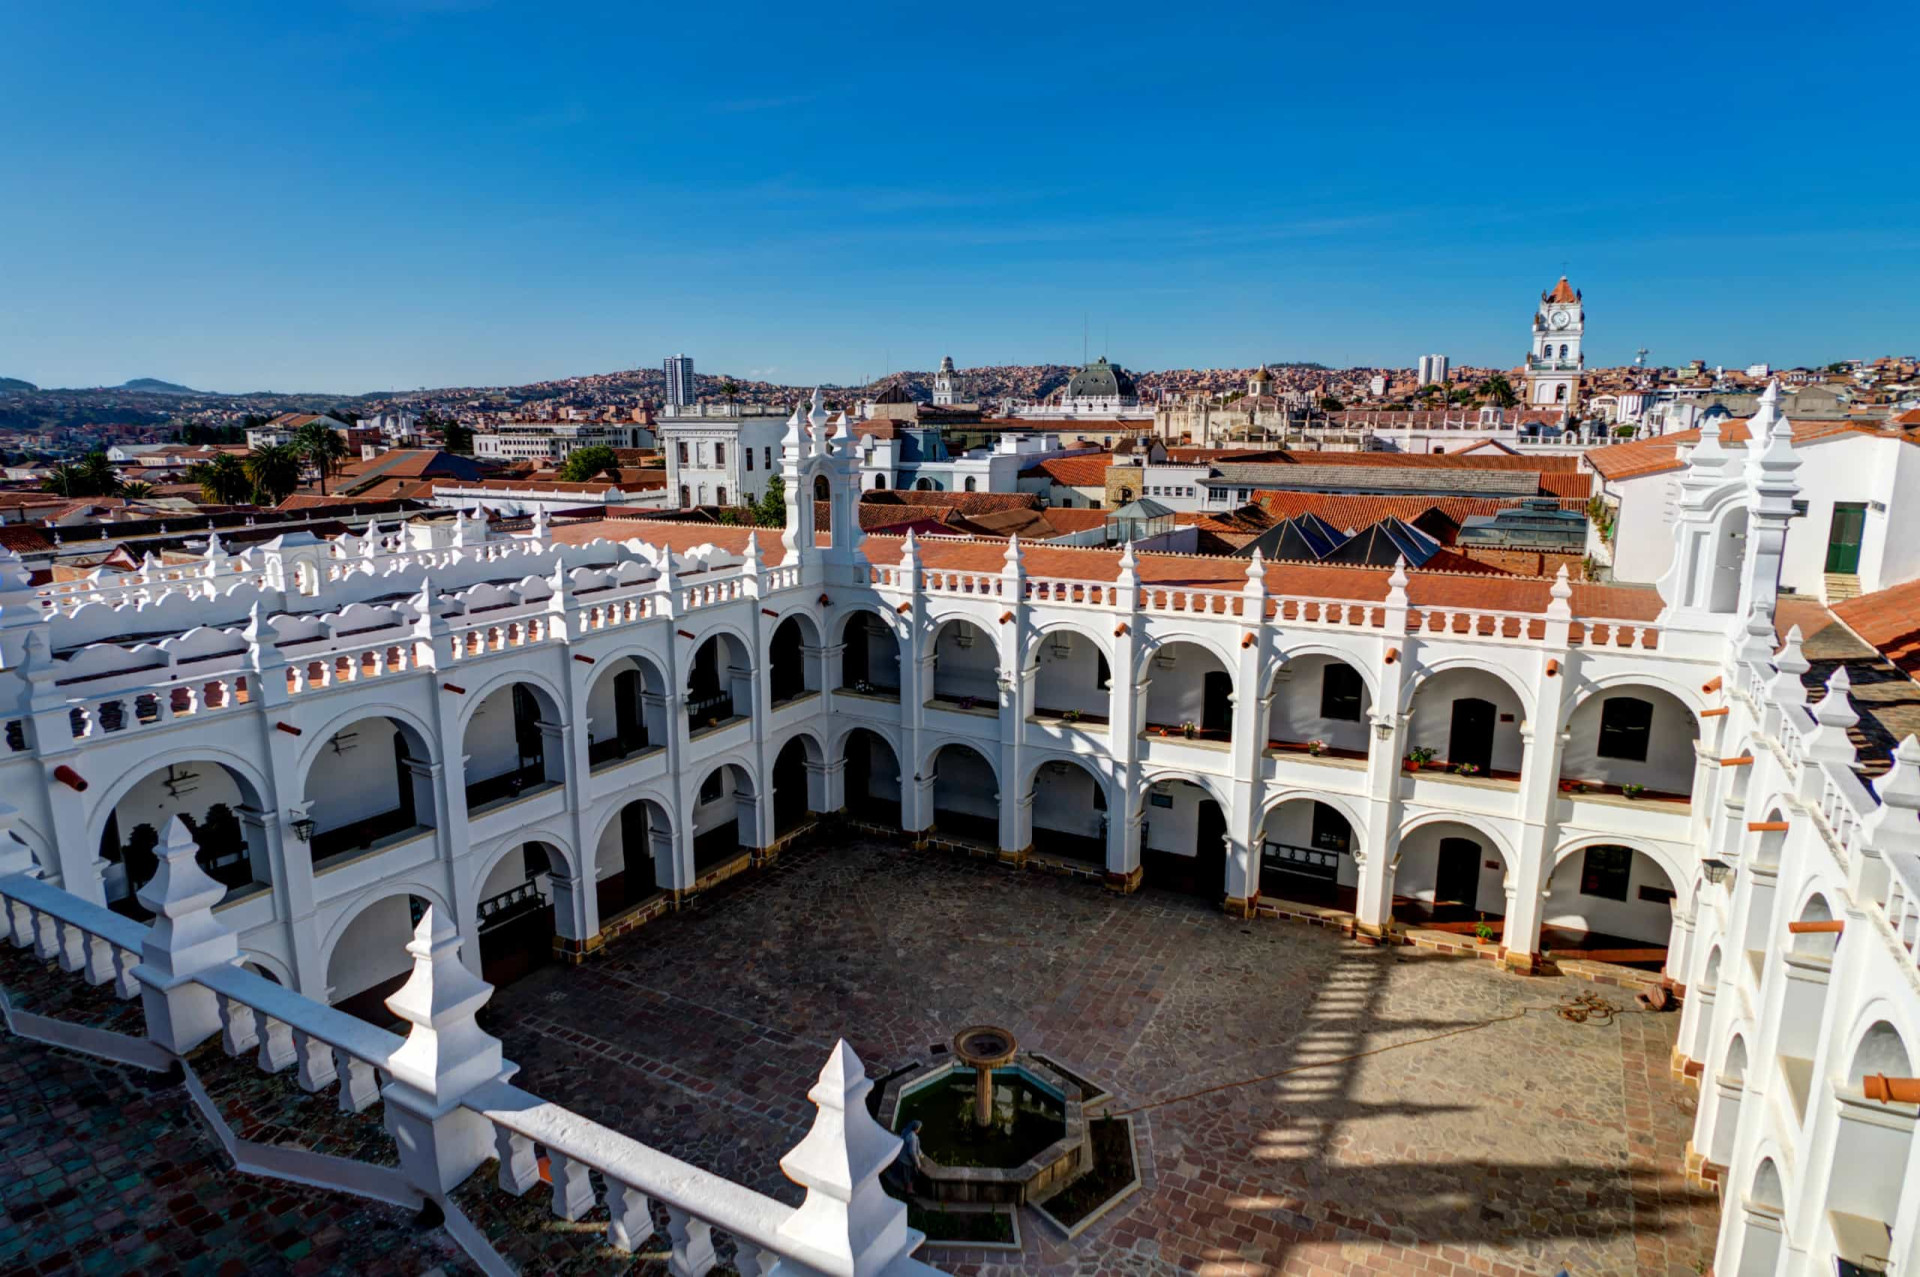 Location: Oropeza Province, Chuquisaca Department<br>Criteria: Cultural<br>Year established: 1991<br>Description: Founded by the Spanish in 1538, Sucre's many old and classic buildings, and especially the religious structures, reflect the fusion of local and European architectural styles.<p>You may also like:<a href="https://www.starsinsider.com/n/316351?utm_source=msn.com&utm_medium=display&utm_campaign=referral_description&utm_content=413555v12en-us"> Classic paintings with secret messages</a></p>